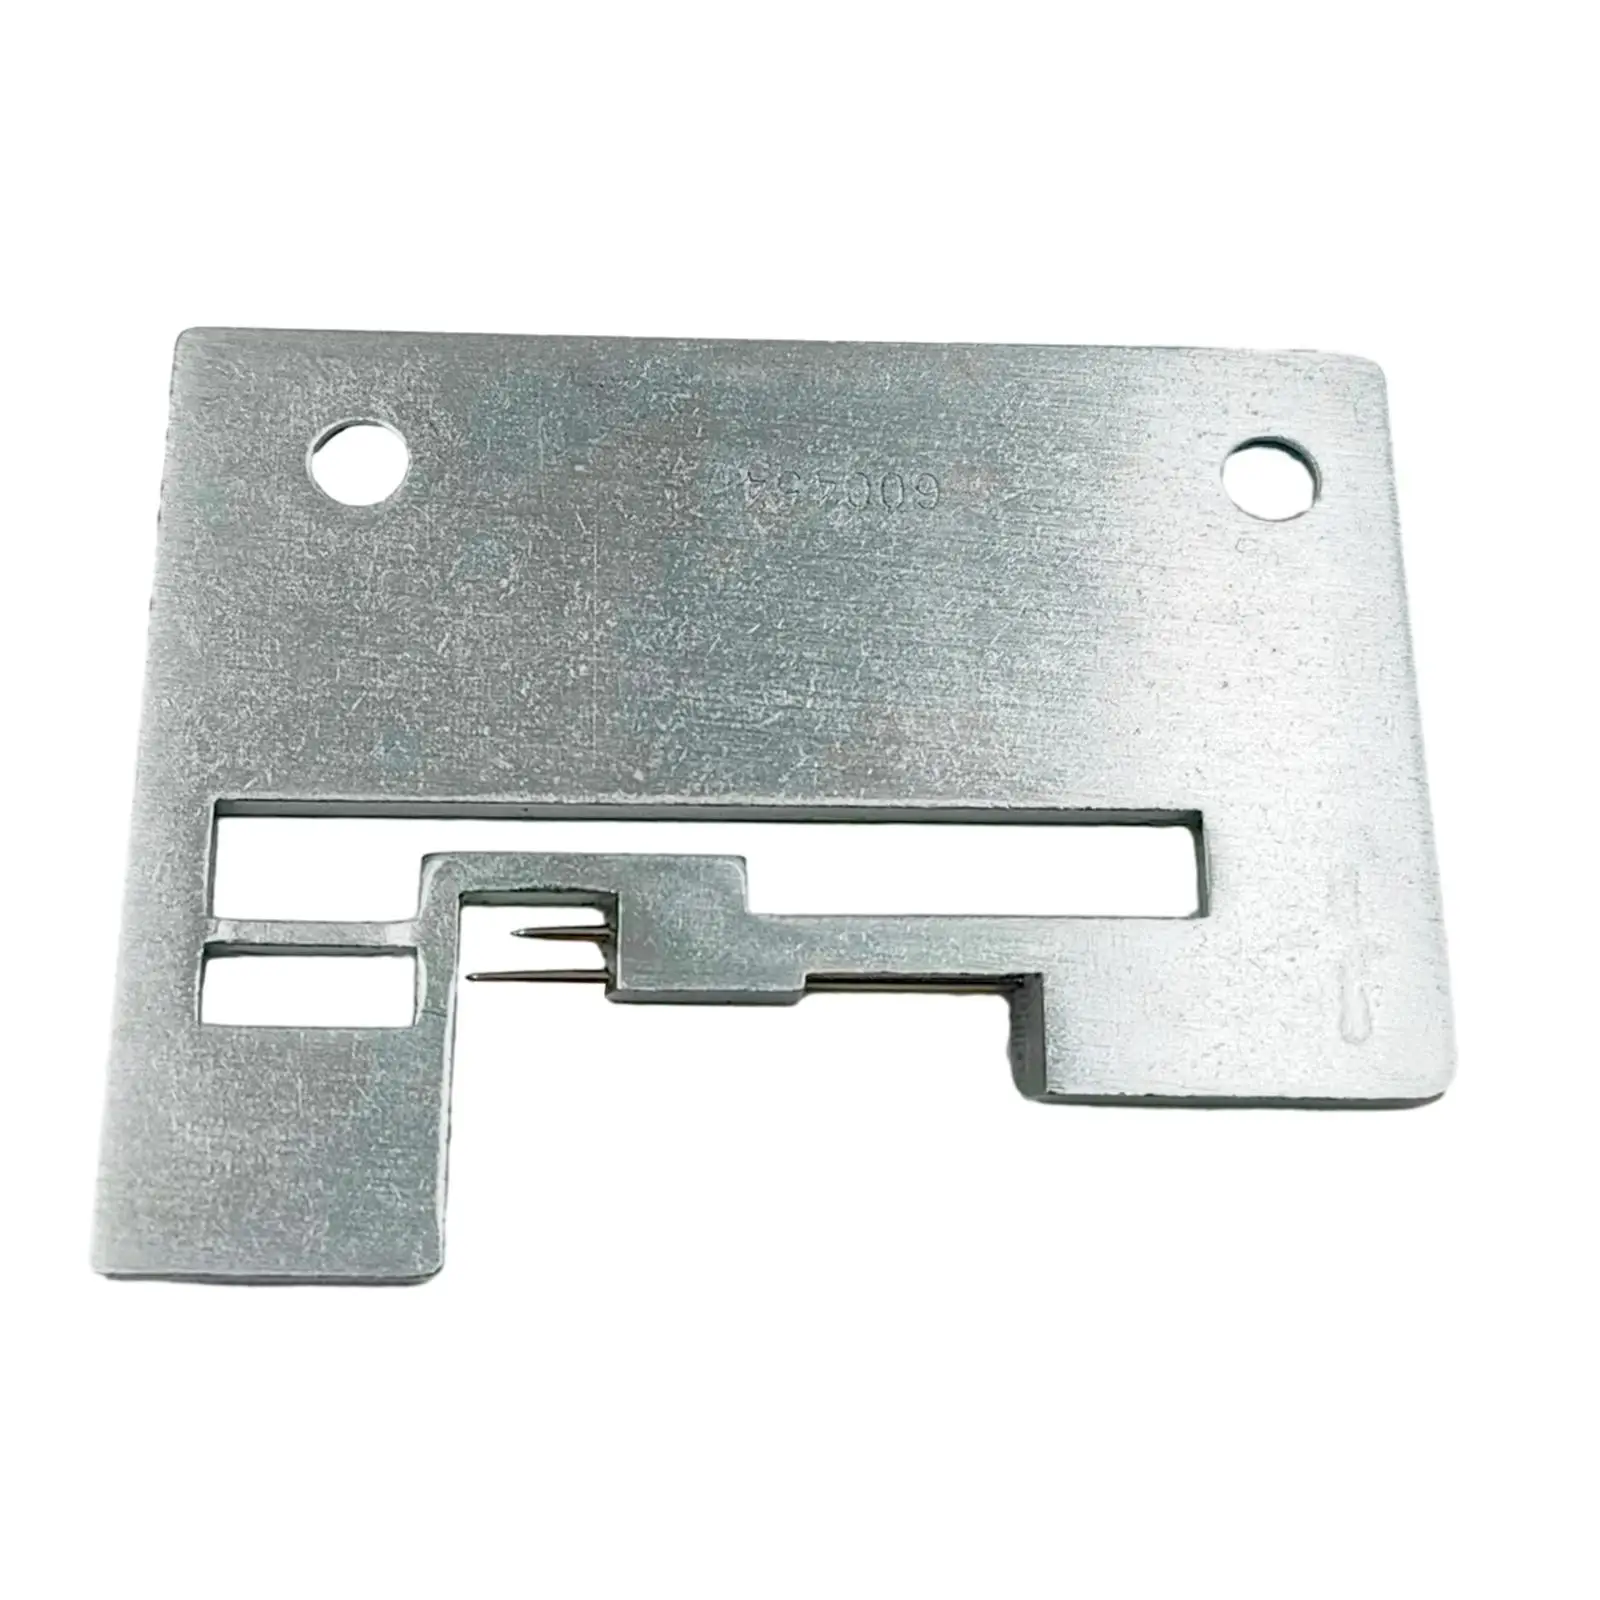 Needle Plate Replaces Industrial Heavy Duty Sturdy Accessories Iron 1x Multifunctional Tool Sewing Machines Accs Practical